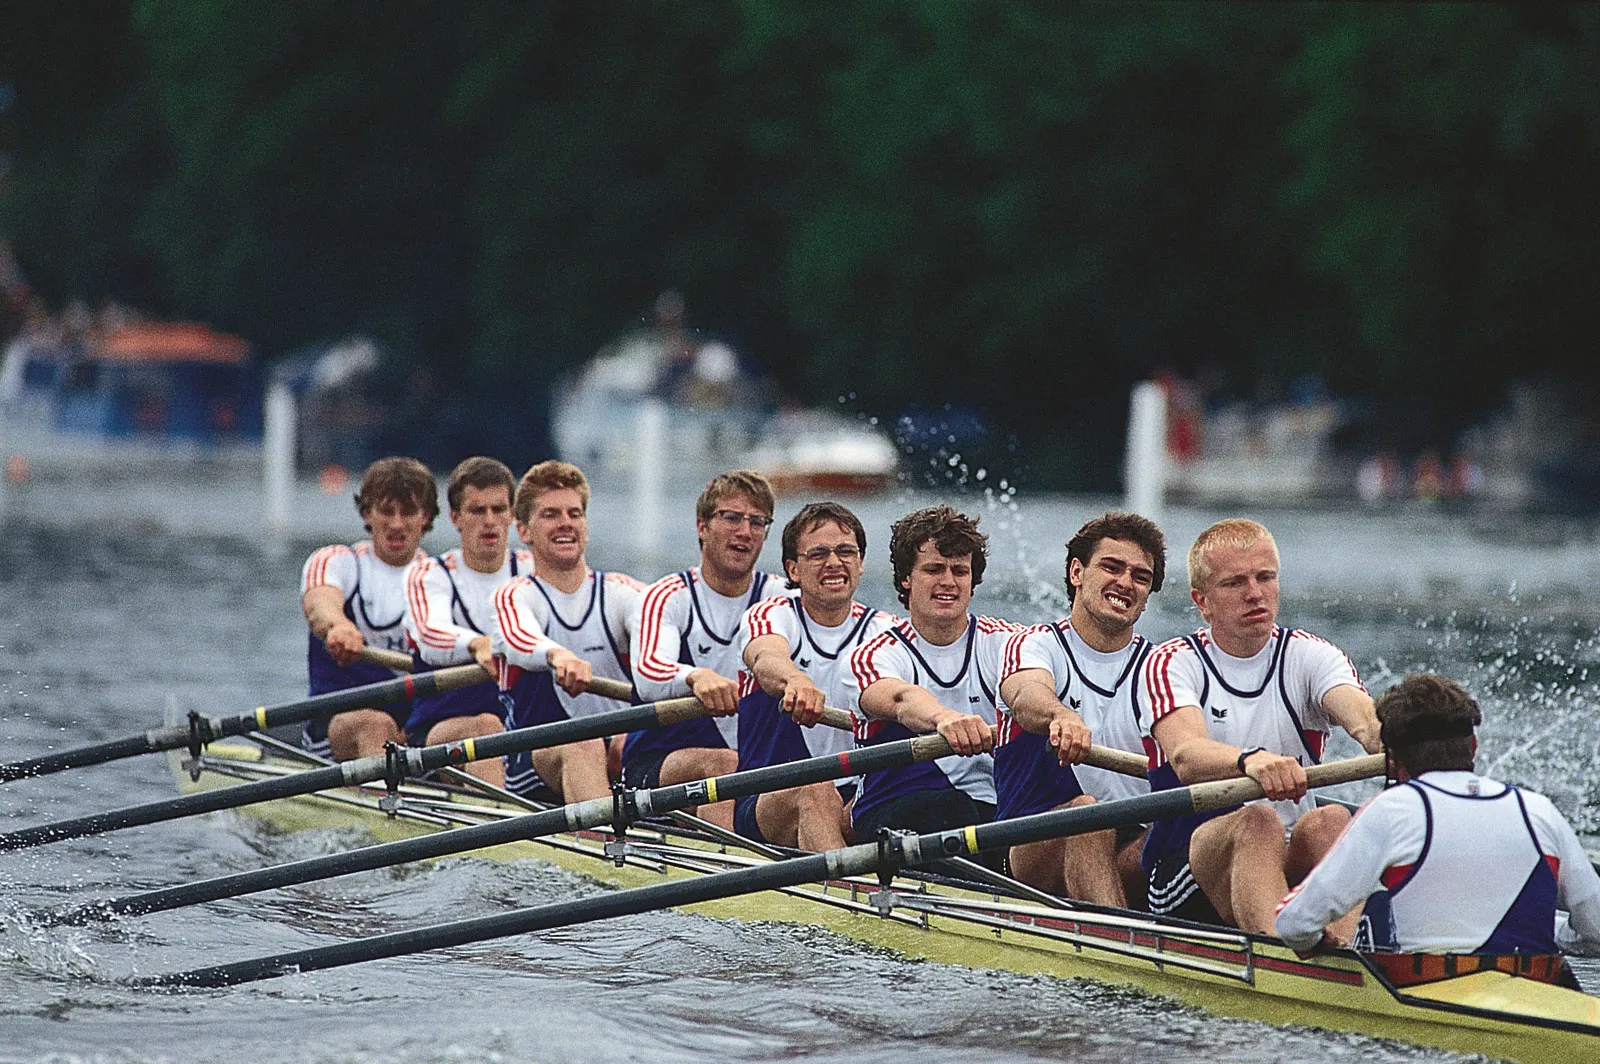 12-facts-about-rowing